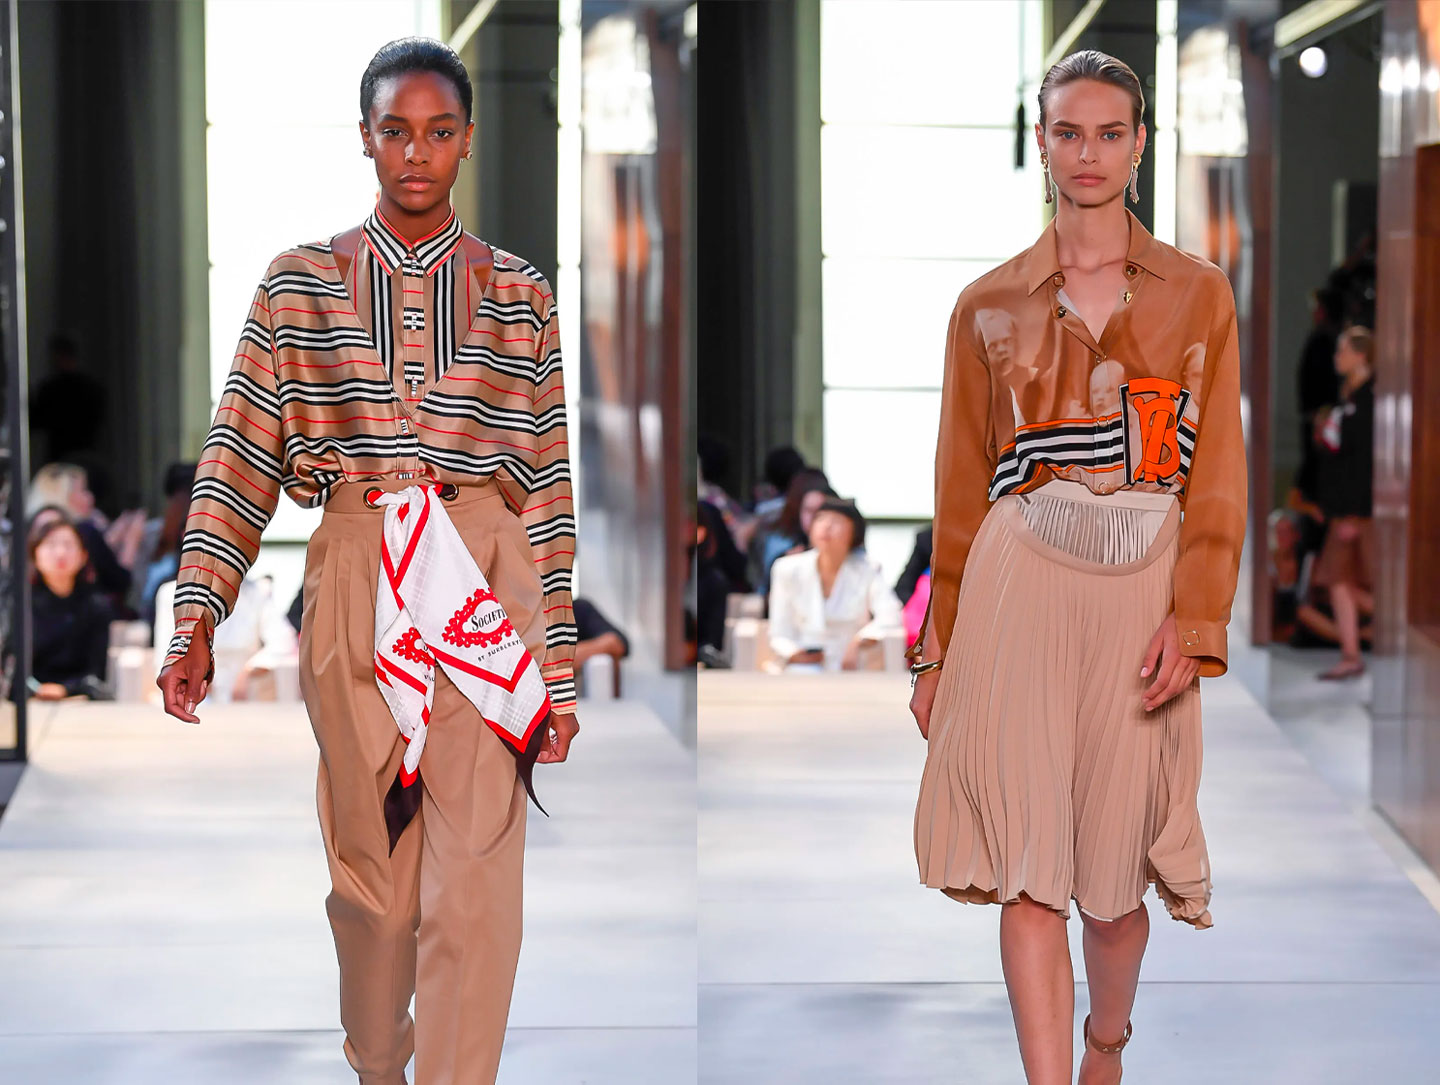 Burberry spring-summer 2019 ready-to-wear show by Riccardo Tisci